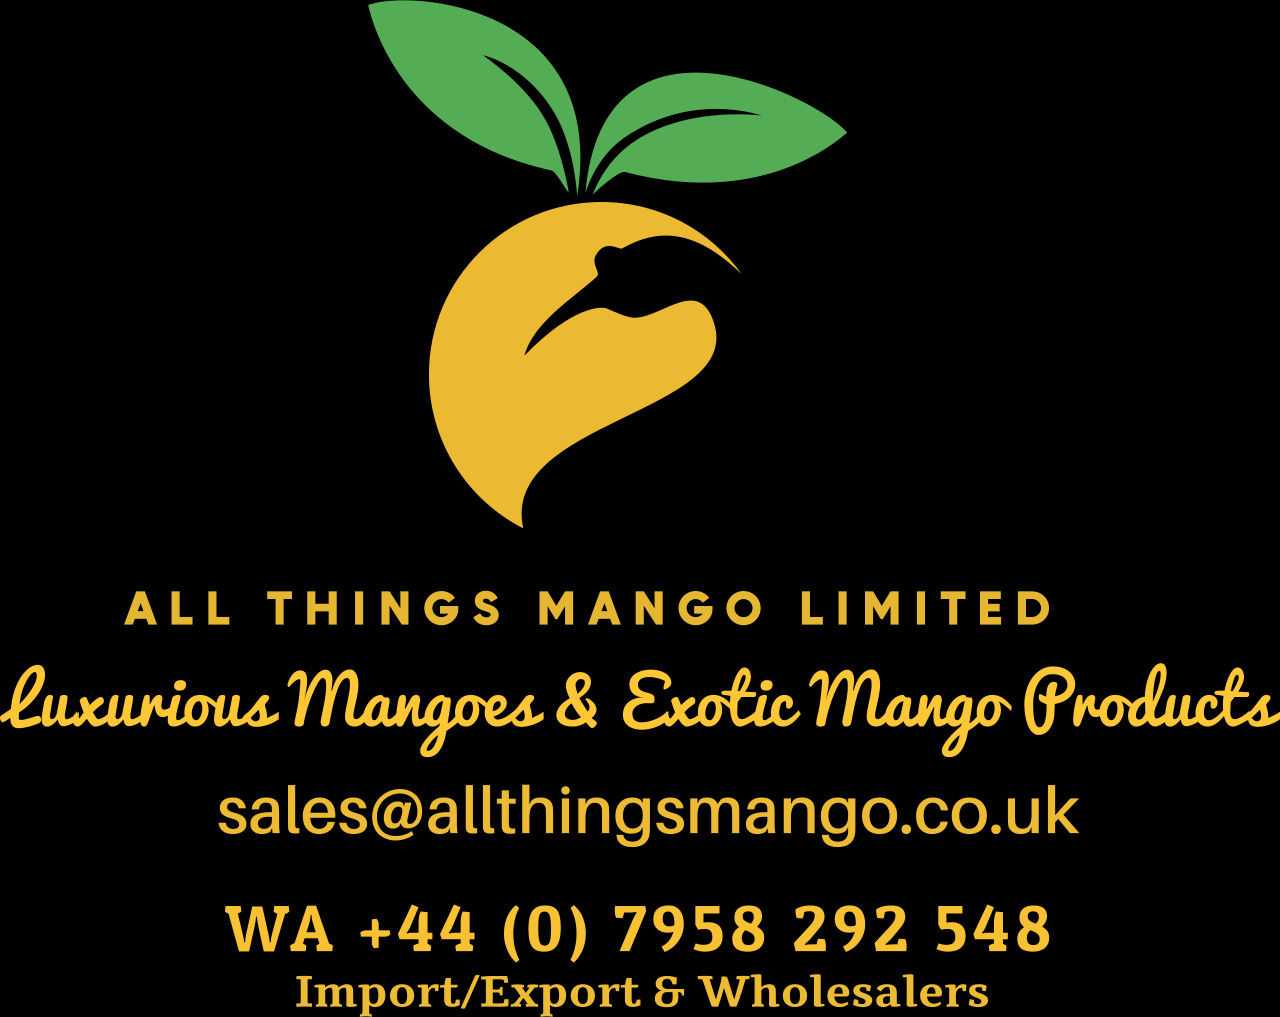  All Things Mango Limited 's logo